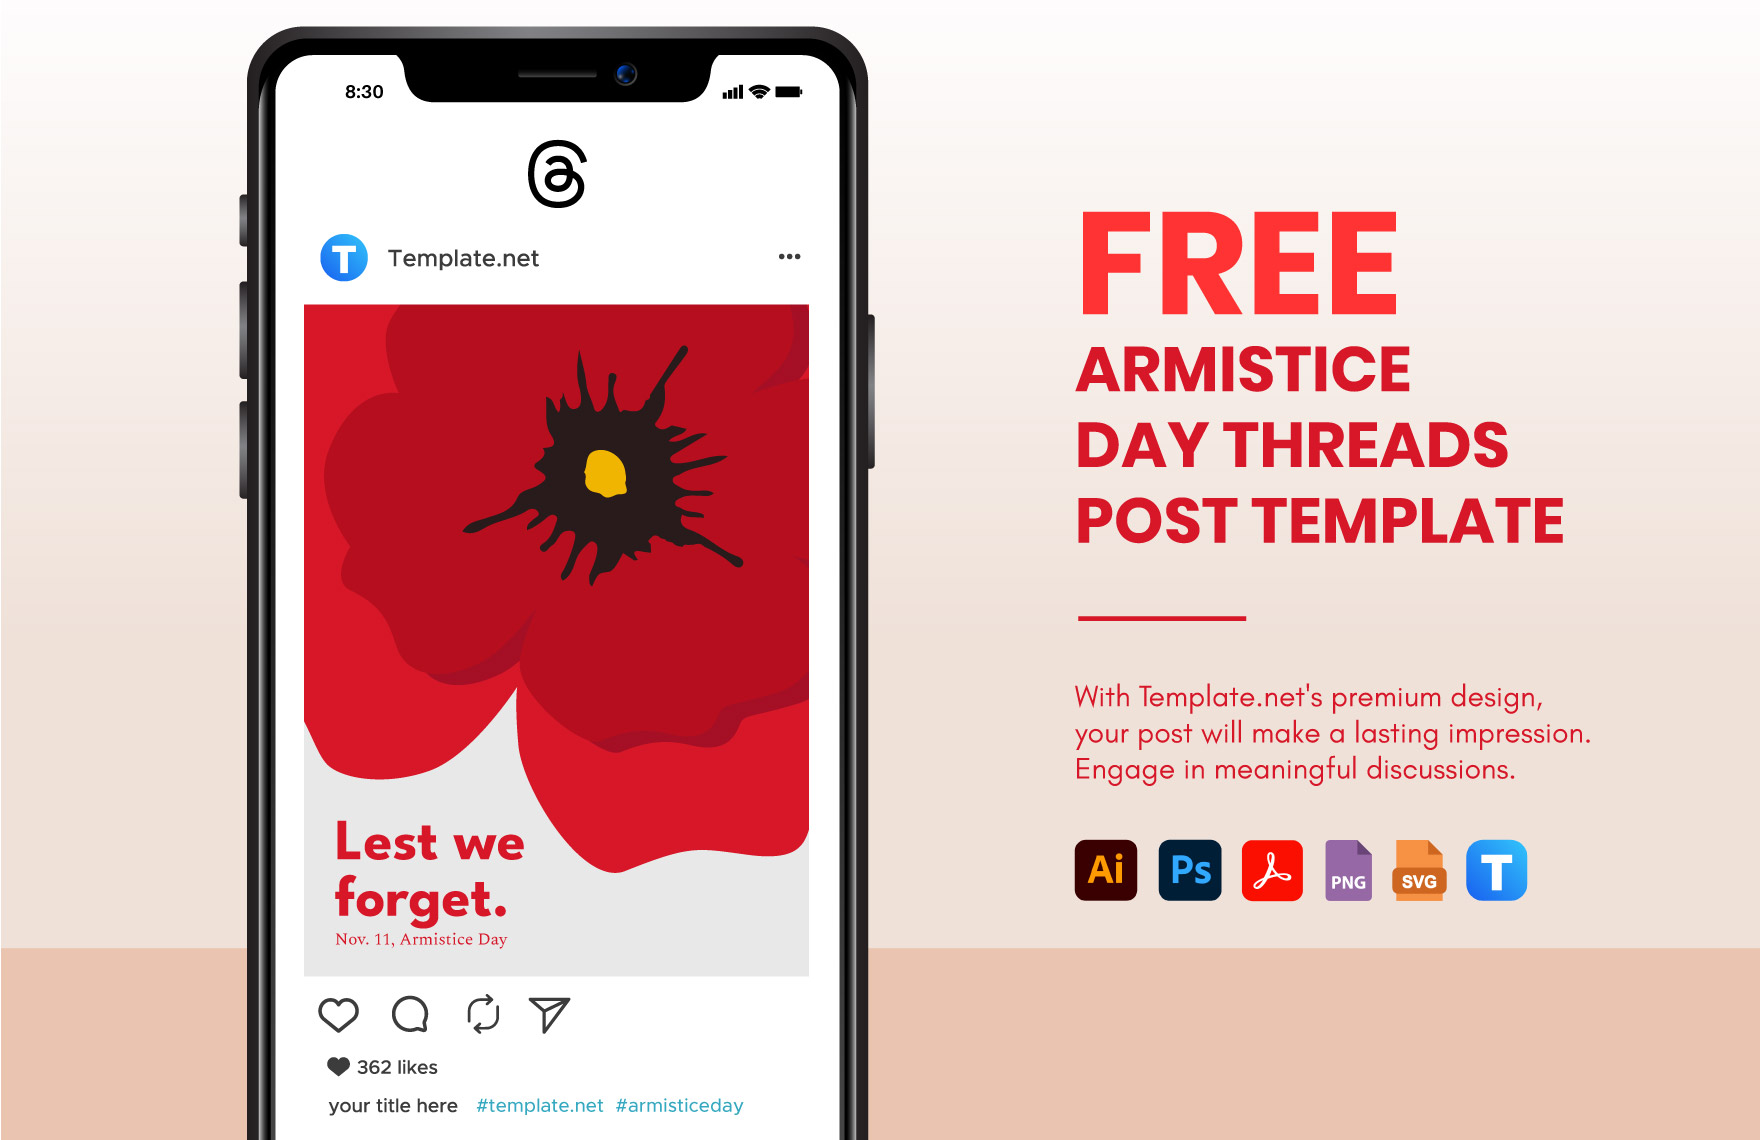 Free Armistice Day Threads Post Template in PDF, Illustrator, PSD, SVG, PNG